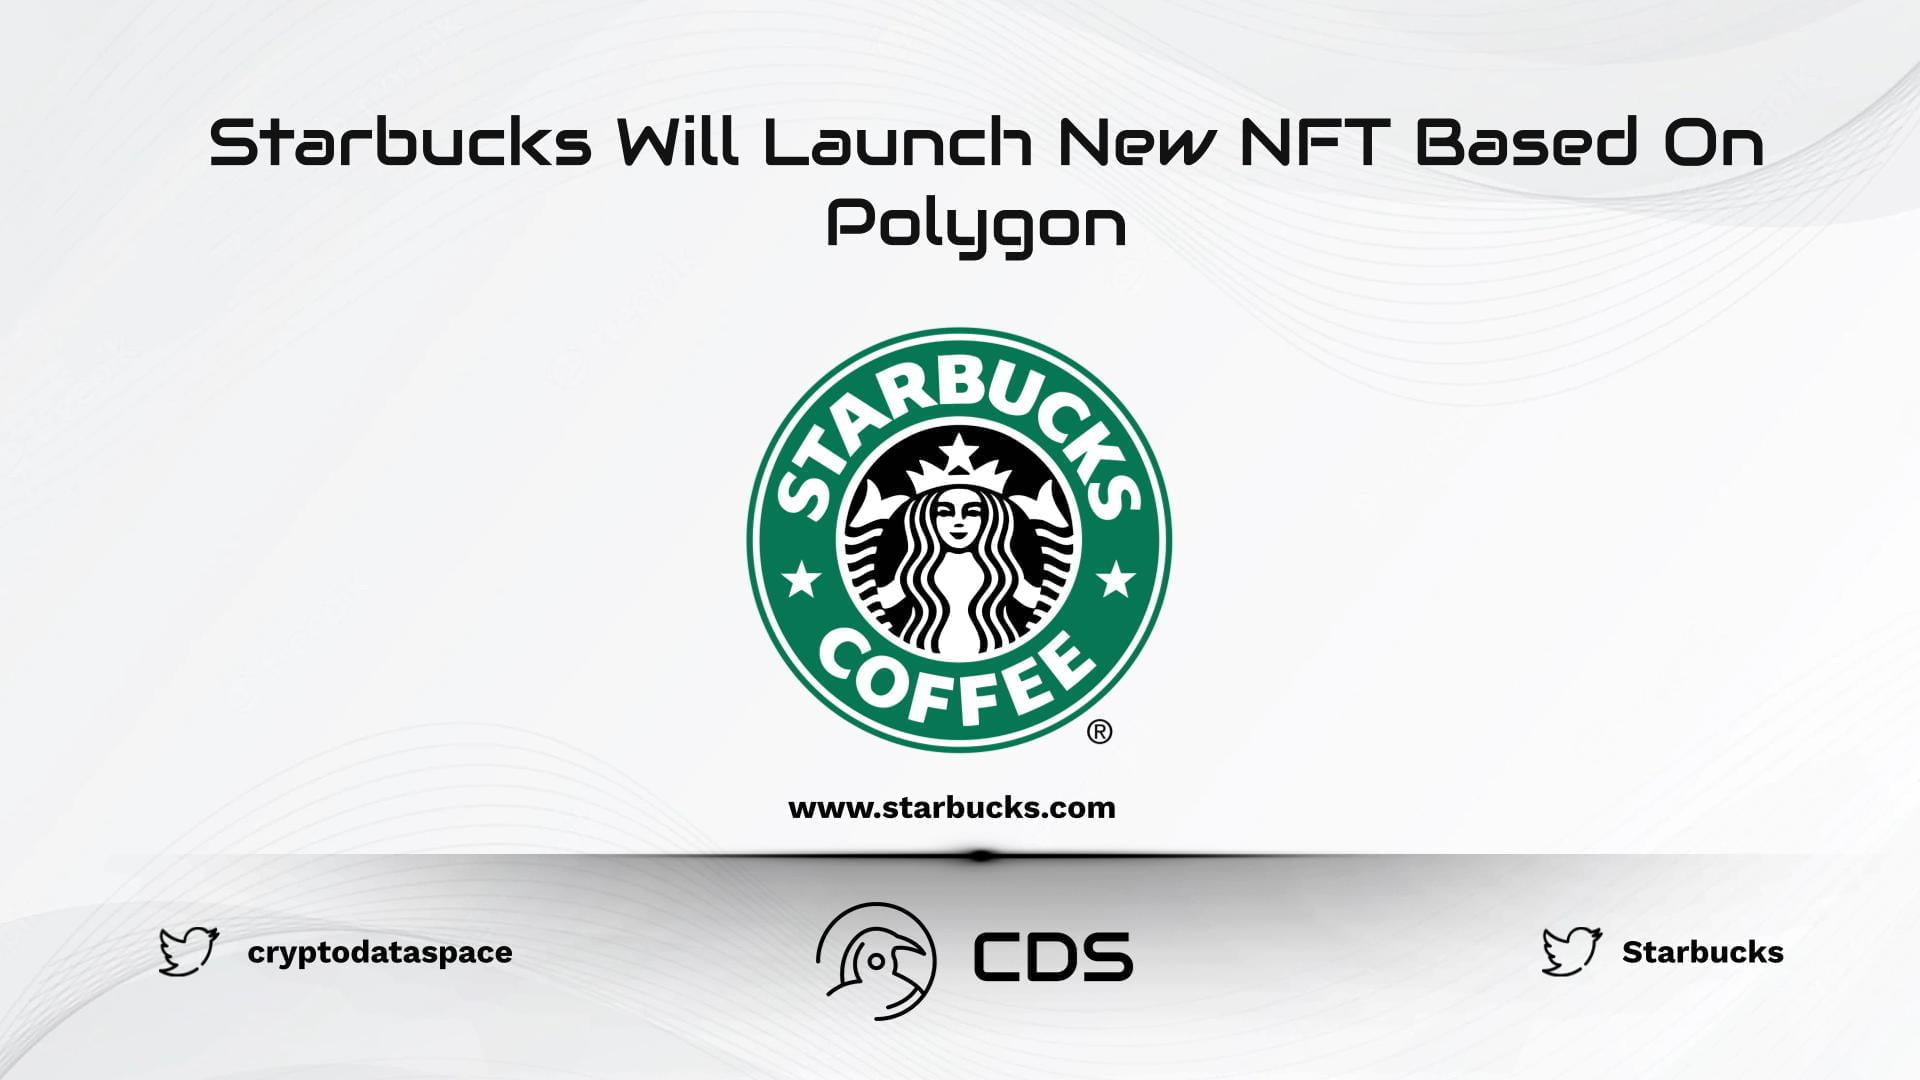 Starbucks Will Launch New NFT Based On Polygon